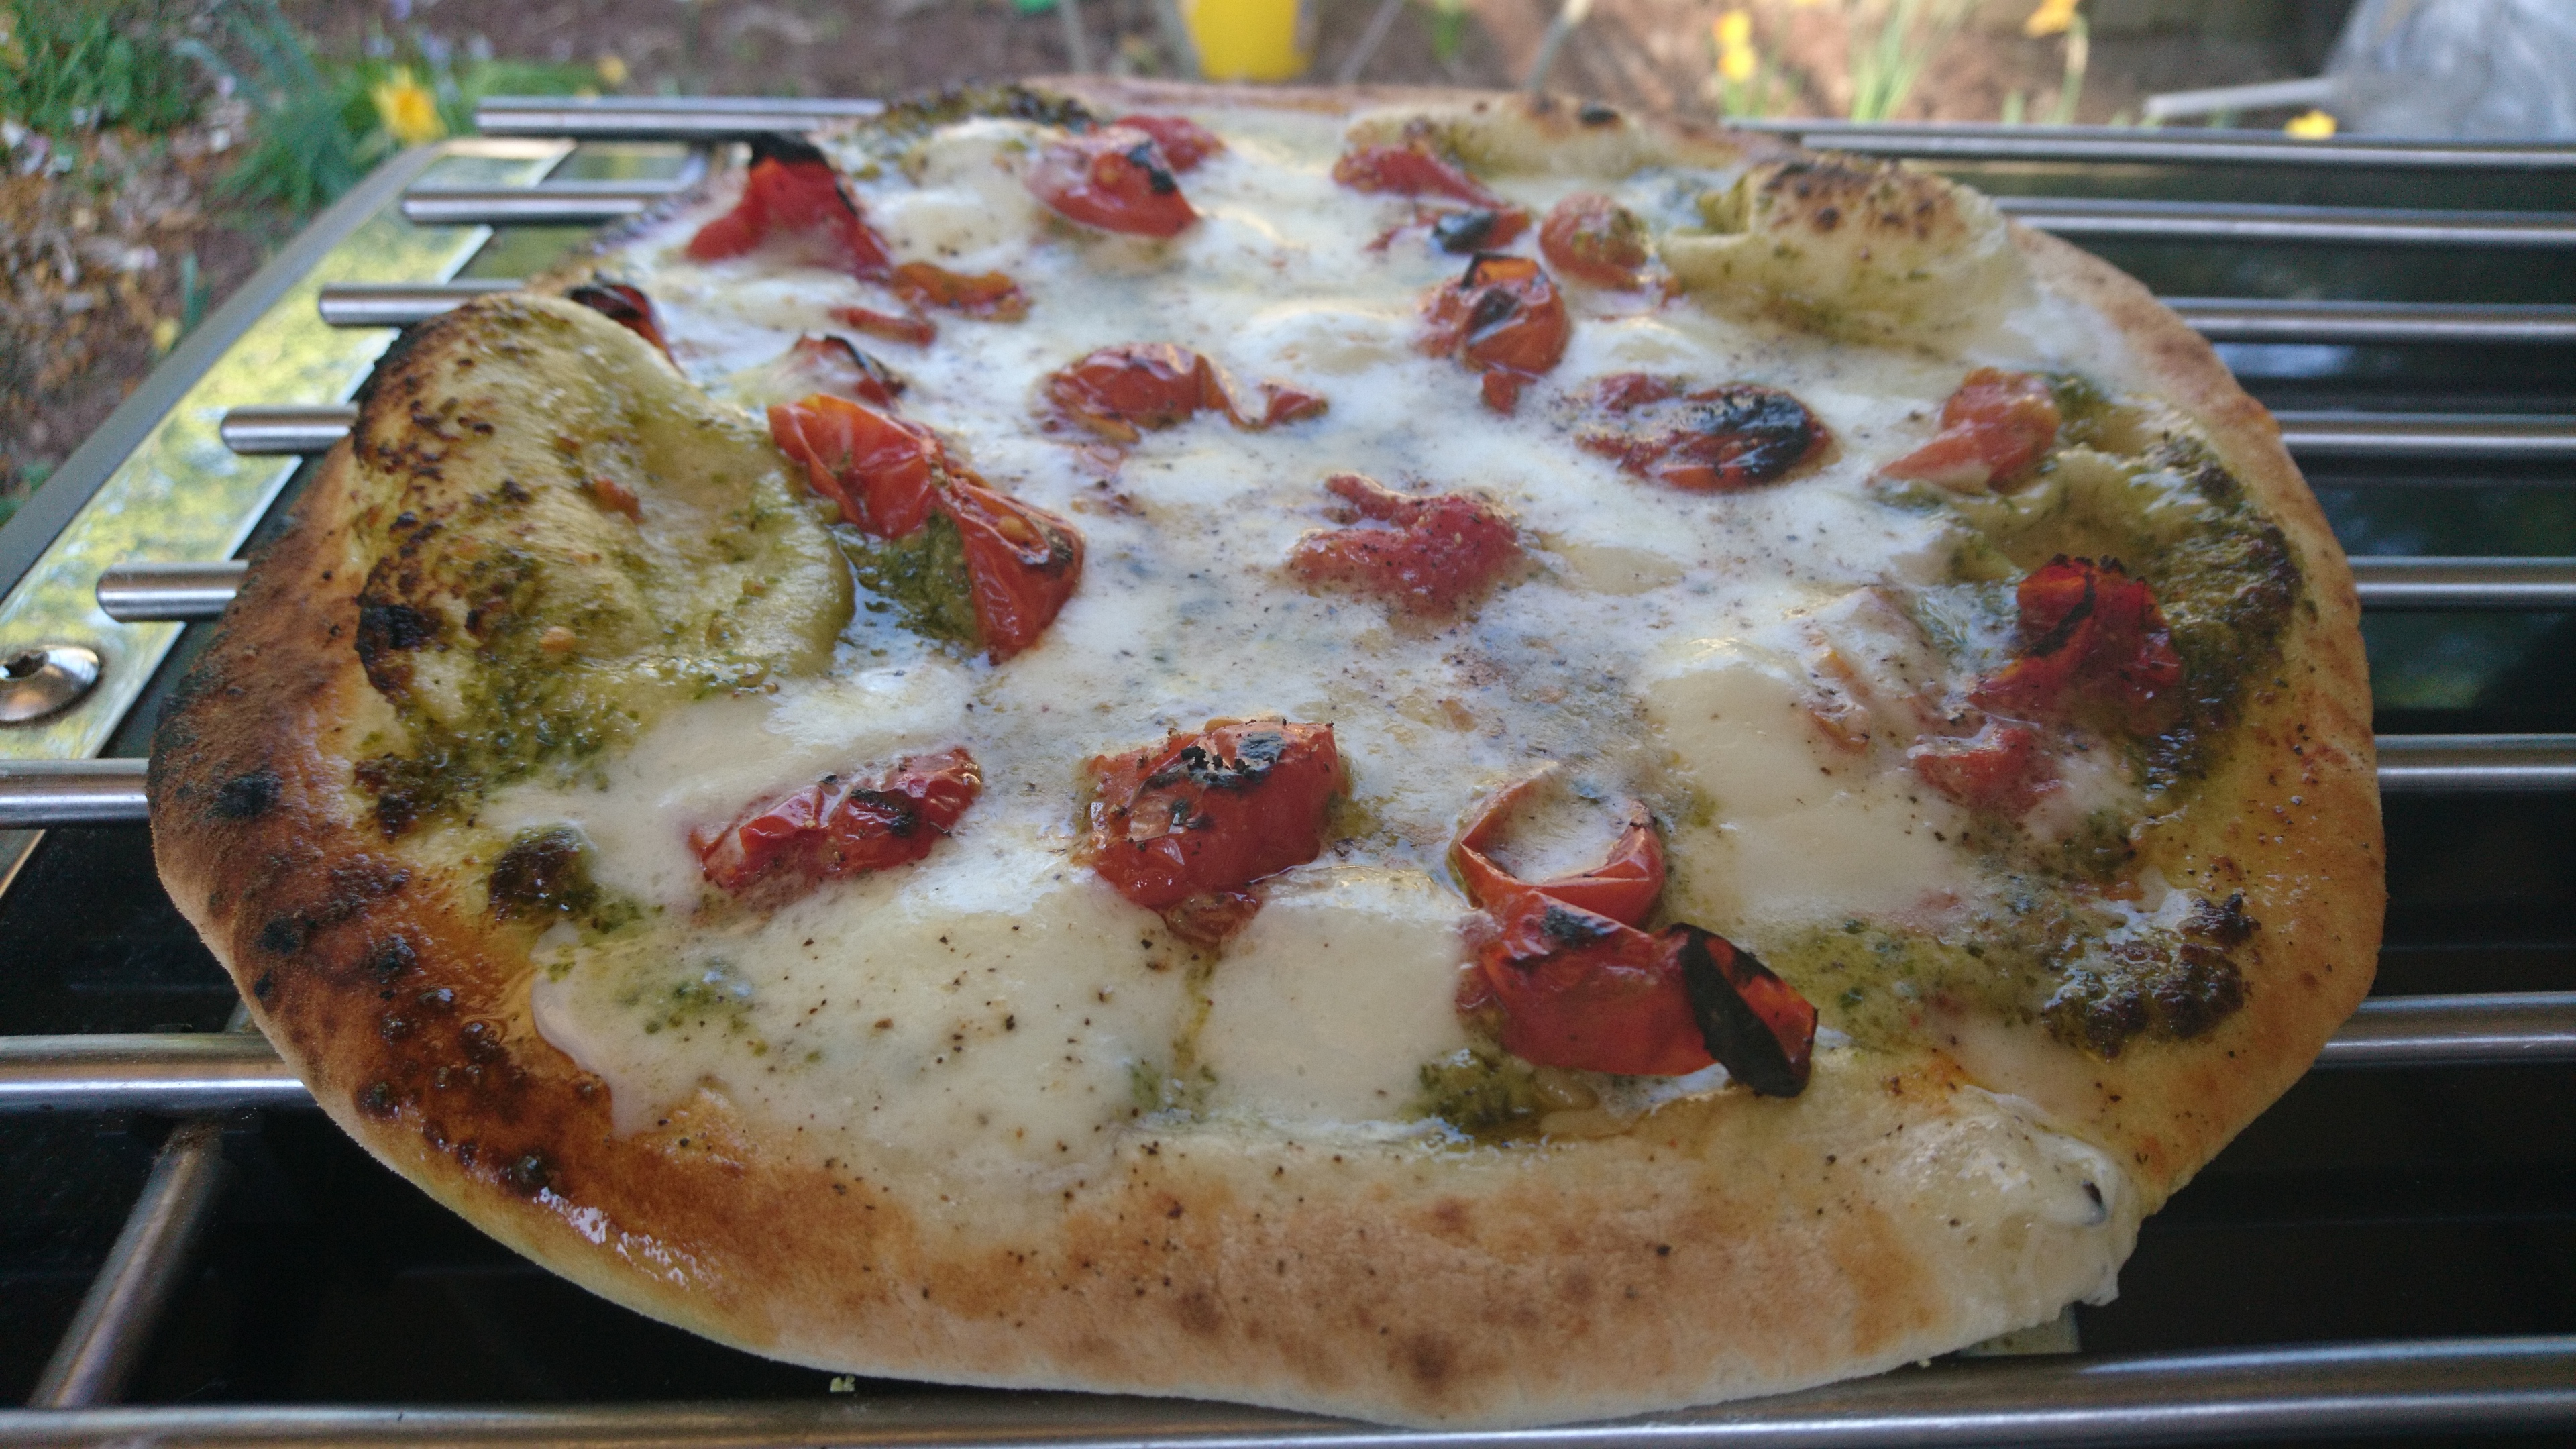 winter margarita pizza with crust spotting shown